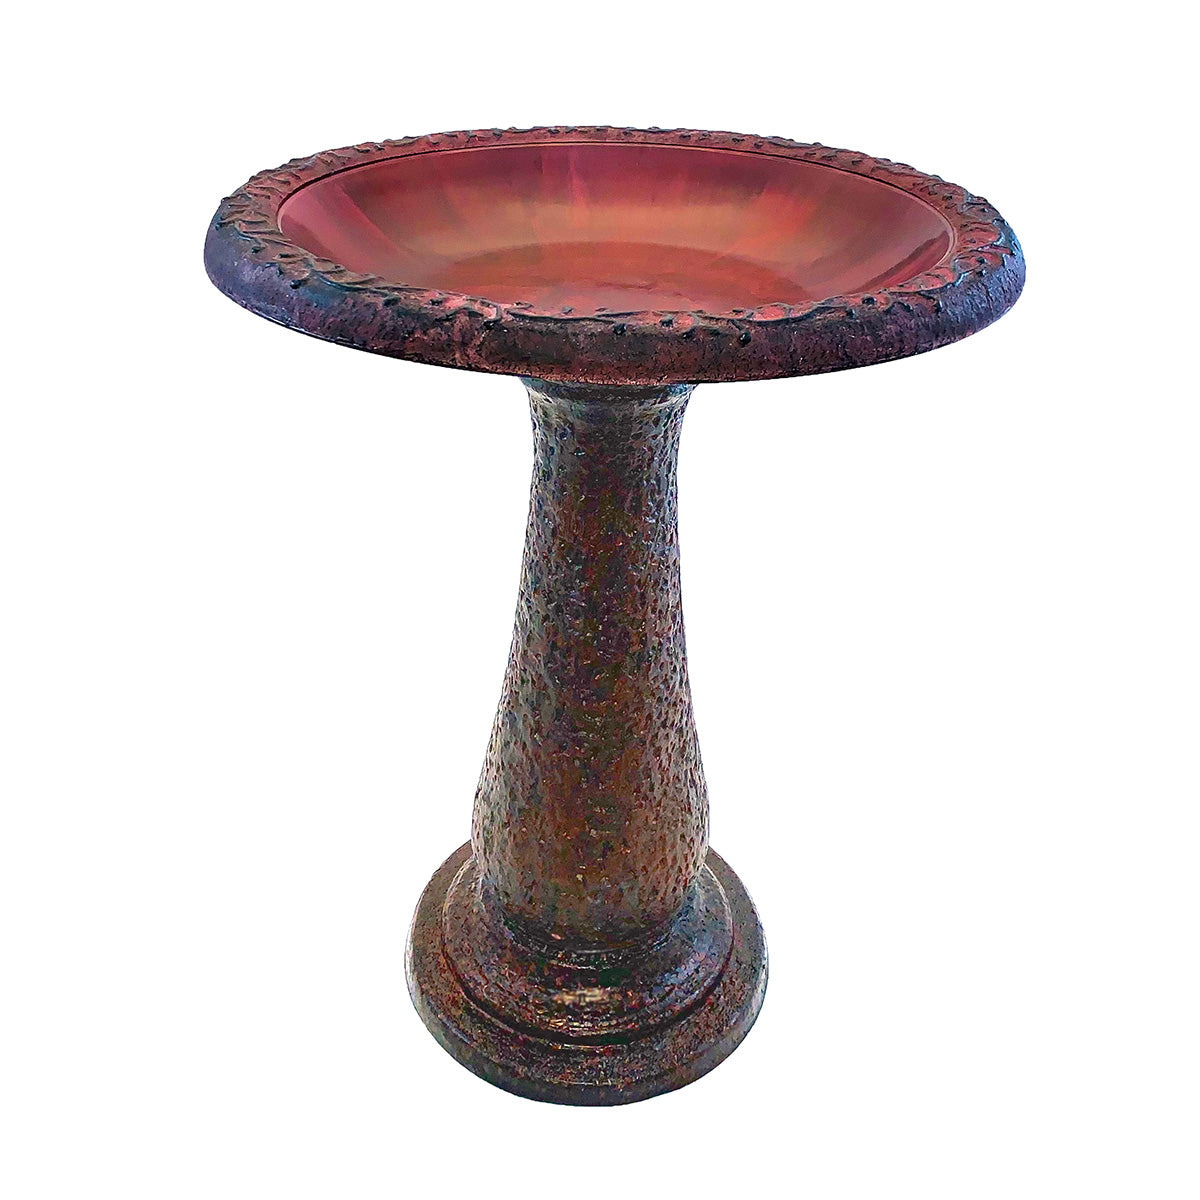 Red/Charcoal Fiber Clay Birdbath. Made of 70% clay, 25% plastic, and 5% fiber. Impact and shatter-resistant. UV protection. 19"D x 24"H 21"H base, 8 lbs.